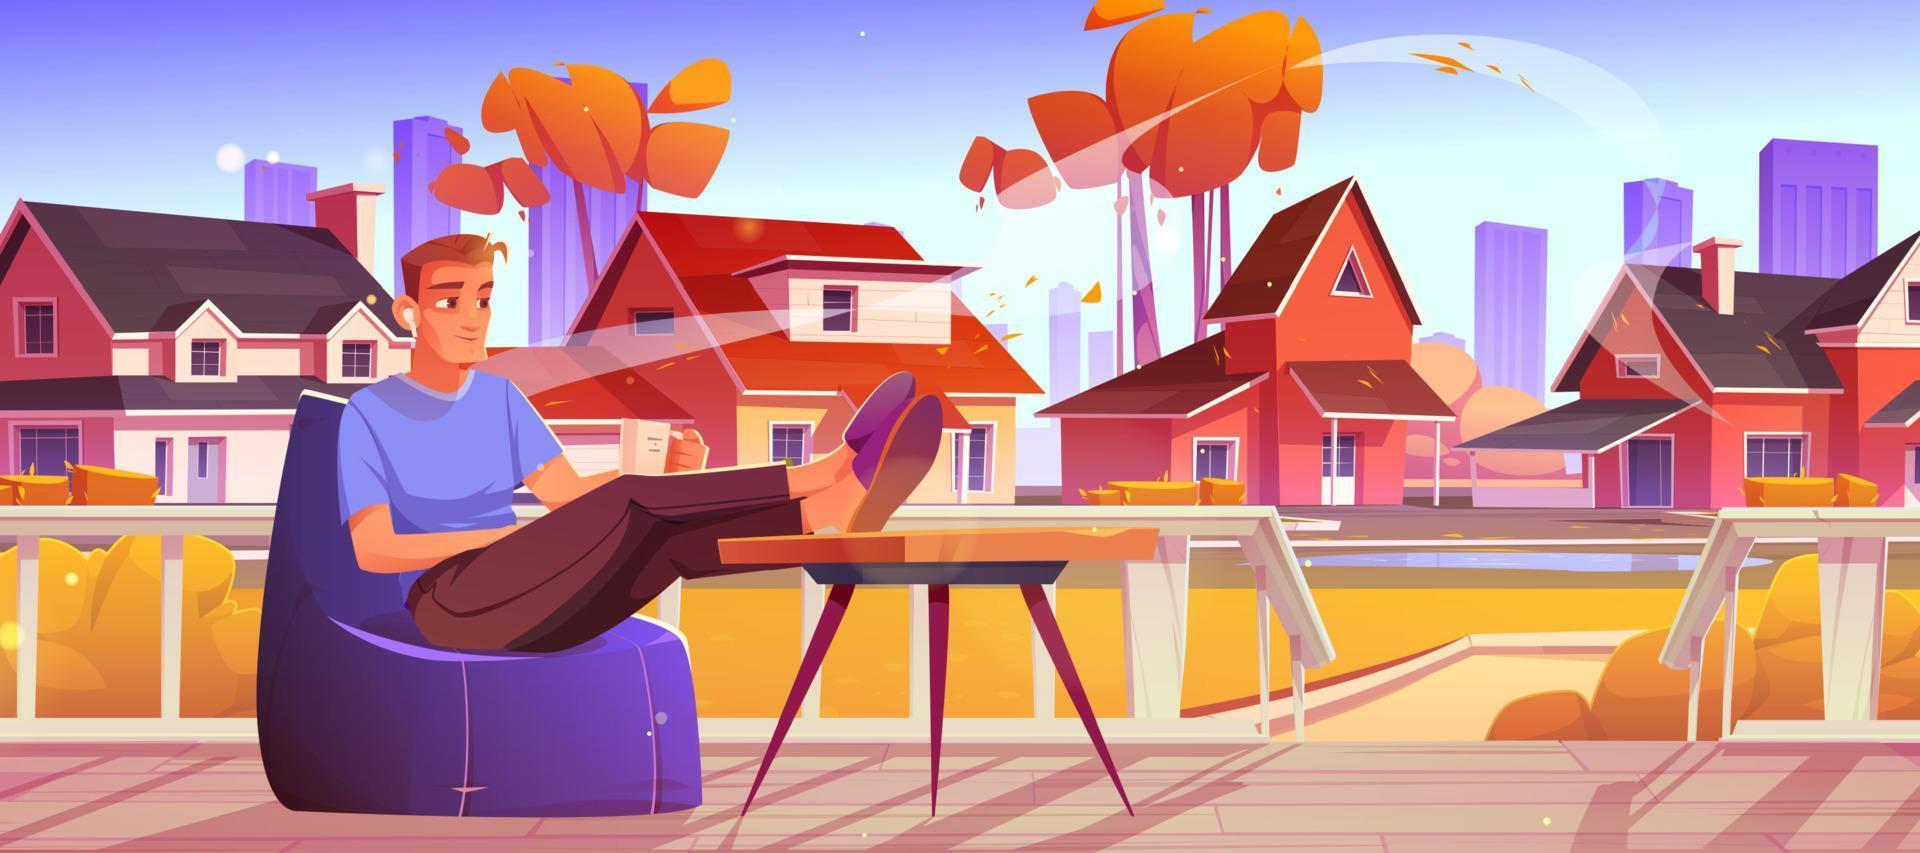 Man relax at outdoor home terrace at suburban area vector